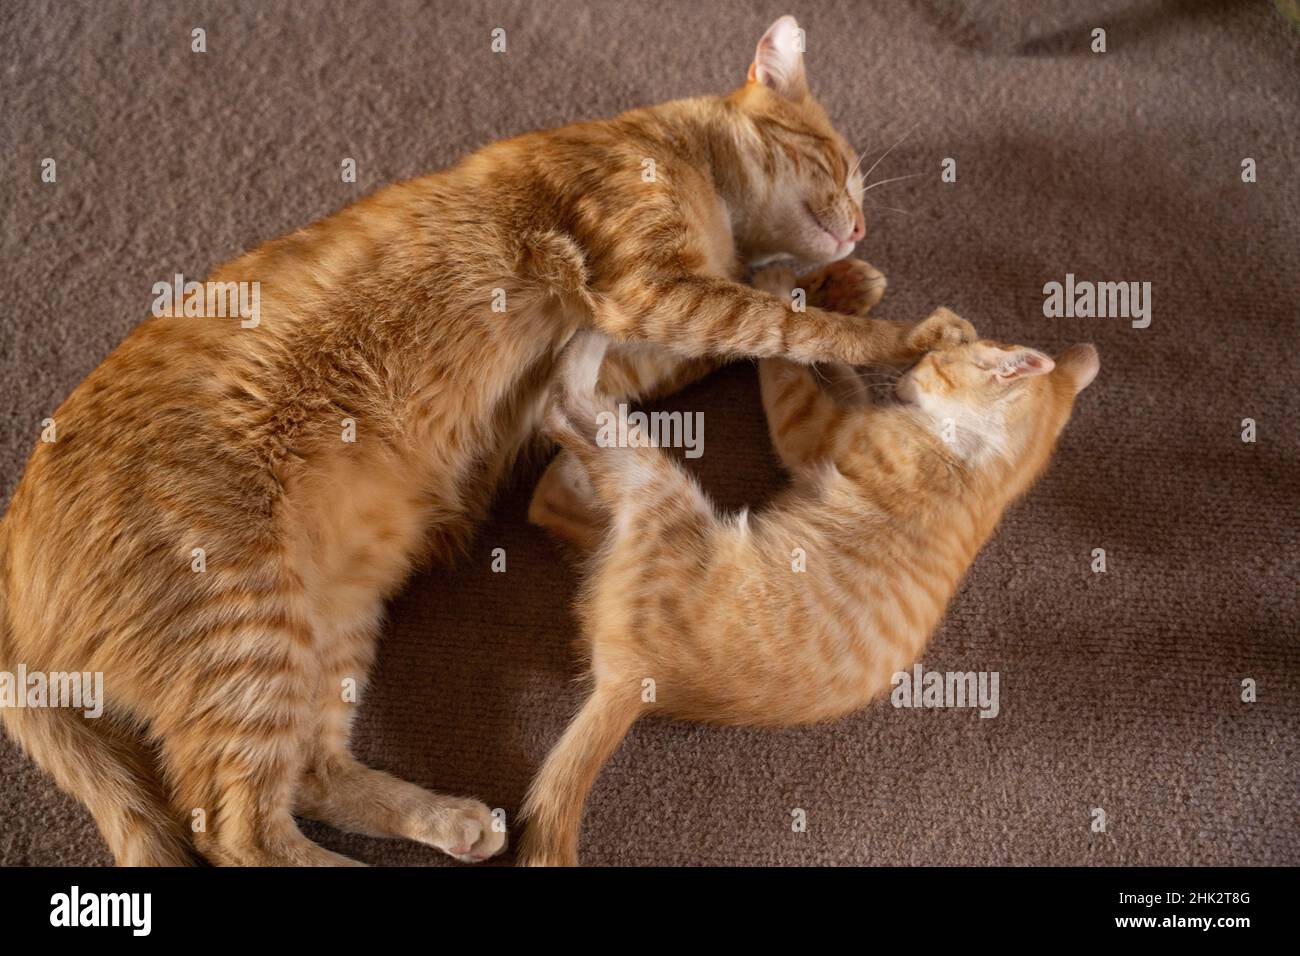 Closeup of the cute ginger cat playing with its kitten on the floor. Stock Photo